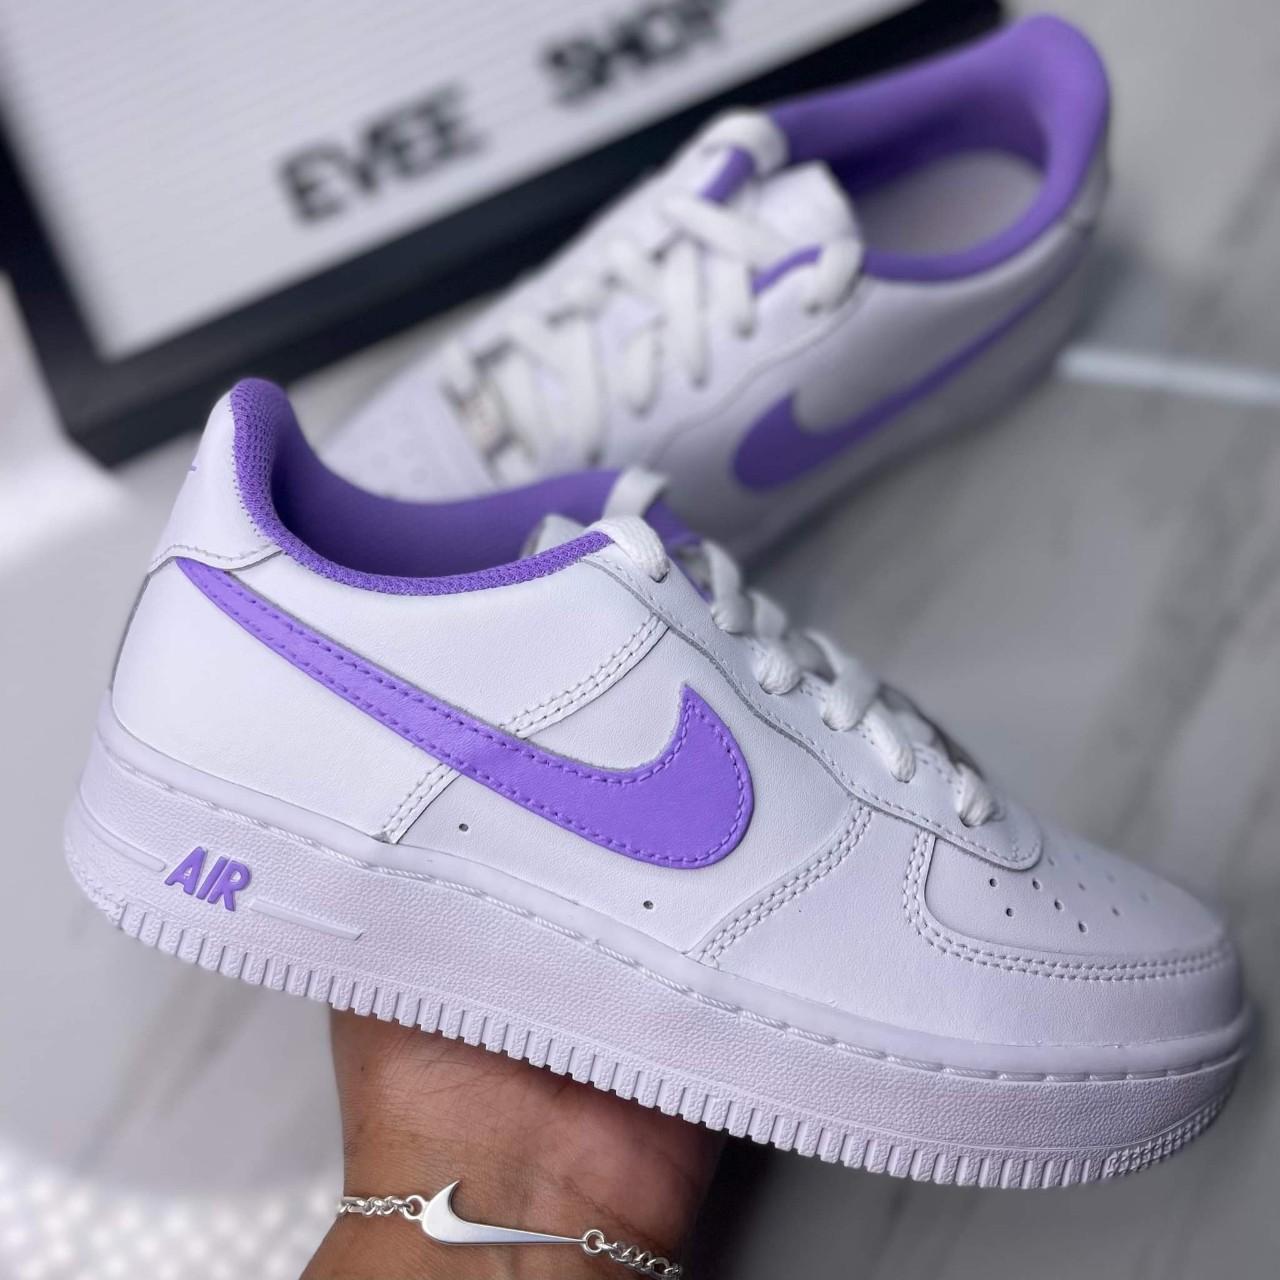 the customized purple air force sneakers